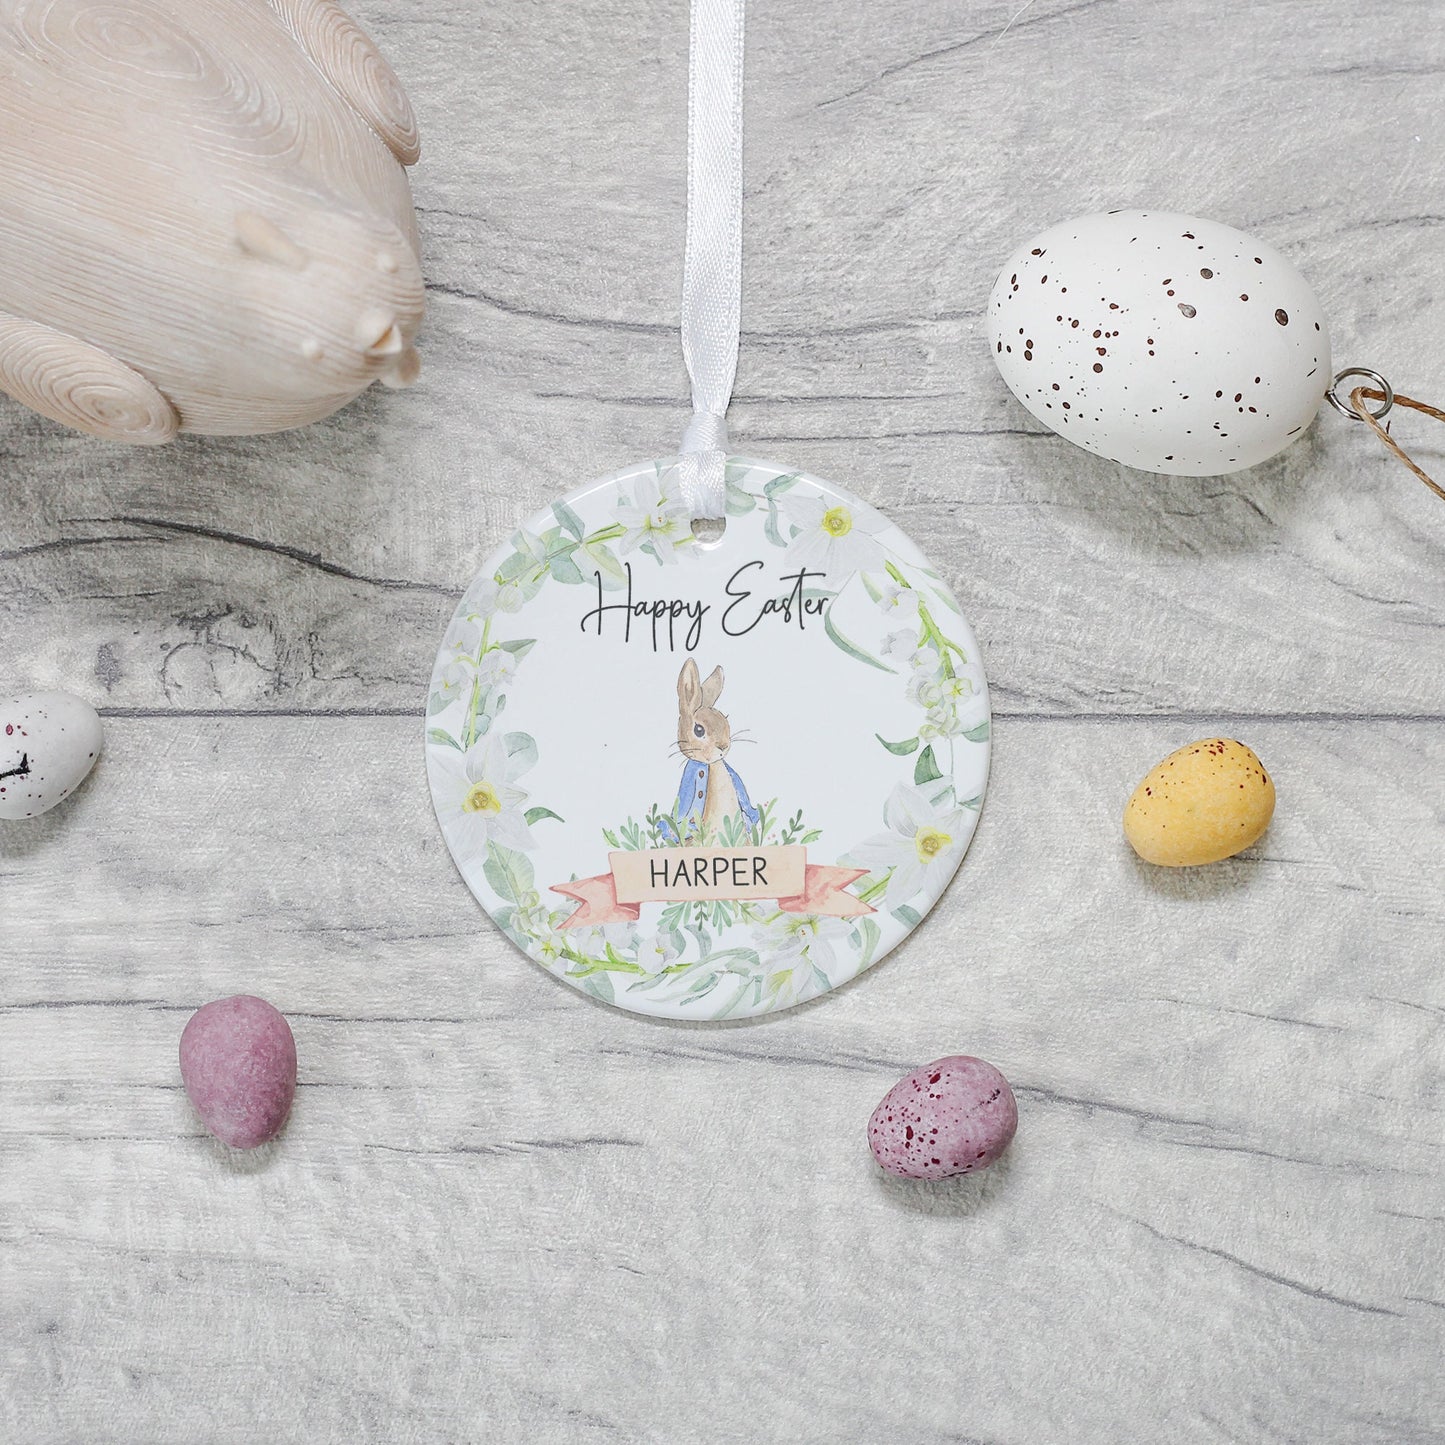 Personalised Happy Easter Decoration, Bunny Rabbit Easter Gift, Easter Egg Hunt Gifts, Baby Girl Boy First Easter, Easter Gifts